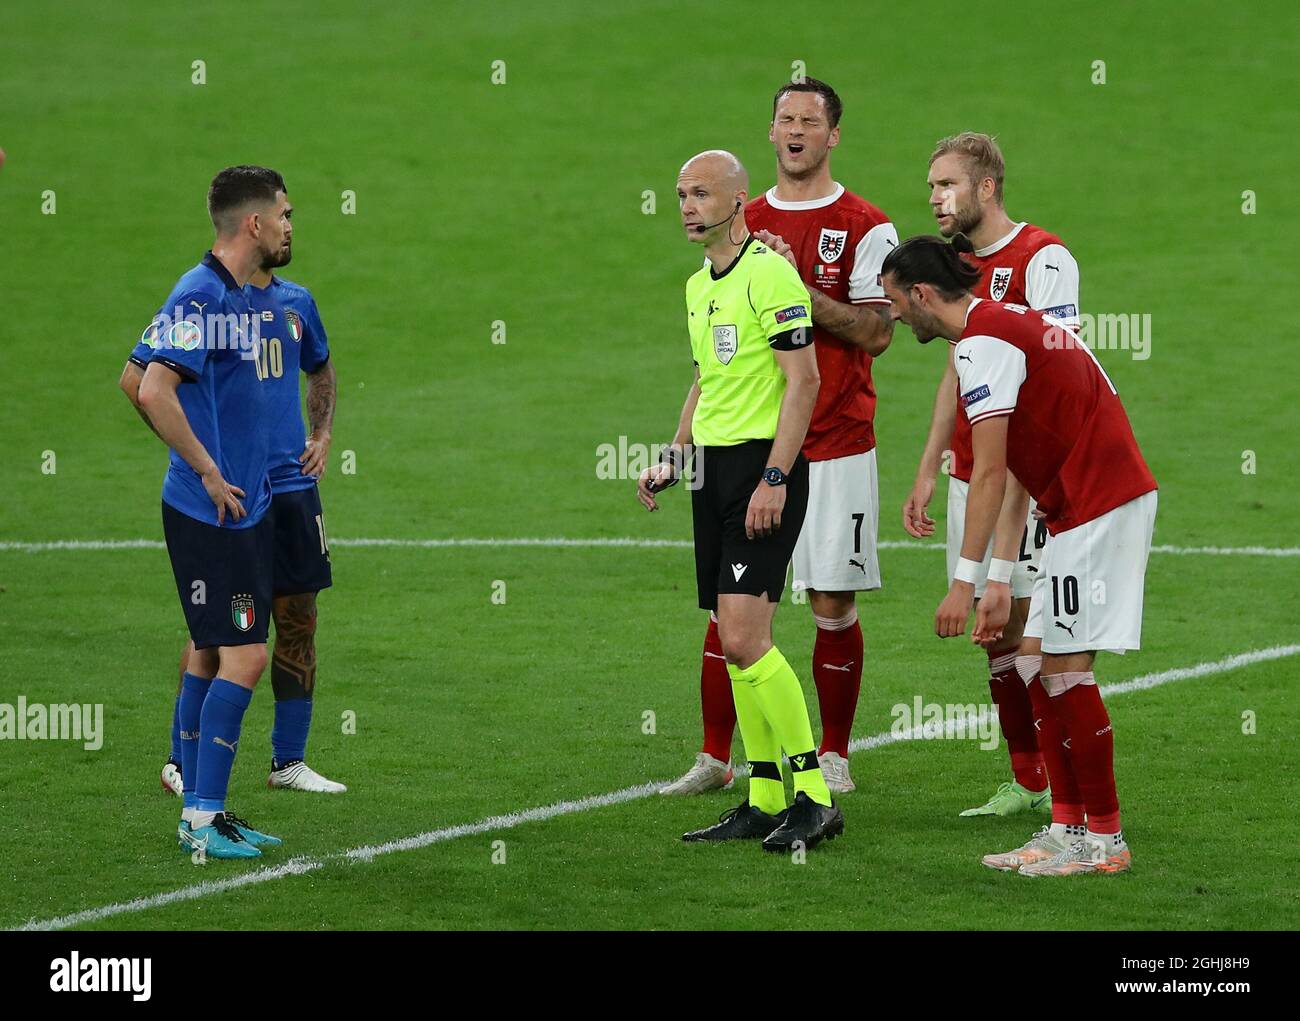 London, England, 26th June 2021. Marko Arnautovic of Austria winces as his goal is ruled out for offside during the UEFA European Championships match at Wembley Stadium, London. Picture credit should read: David Klein / Sportimage via PA Images Stock Photo